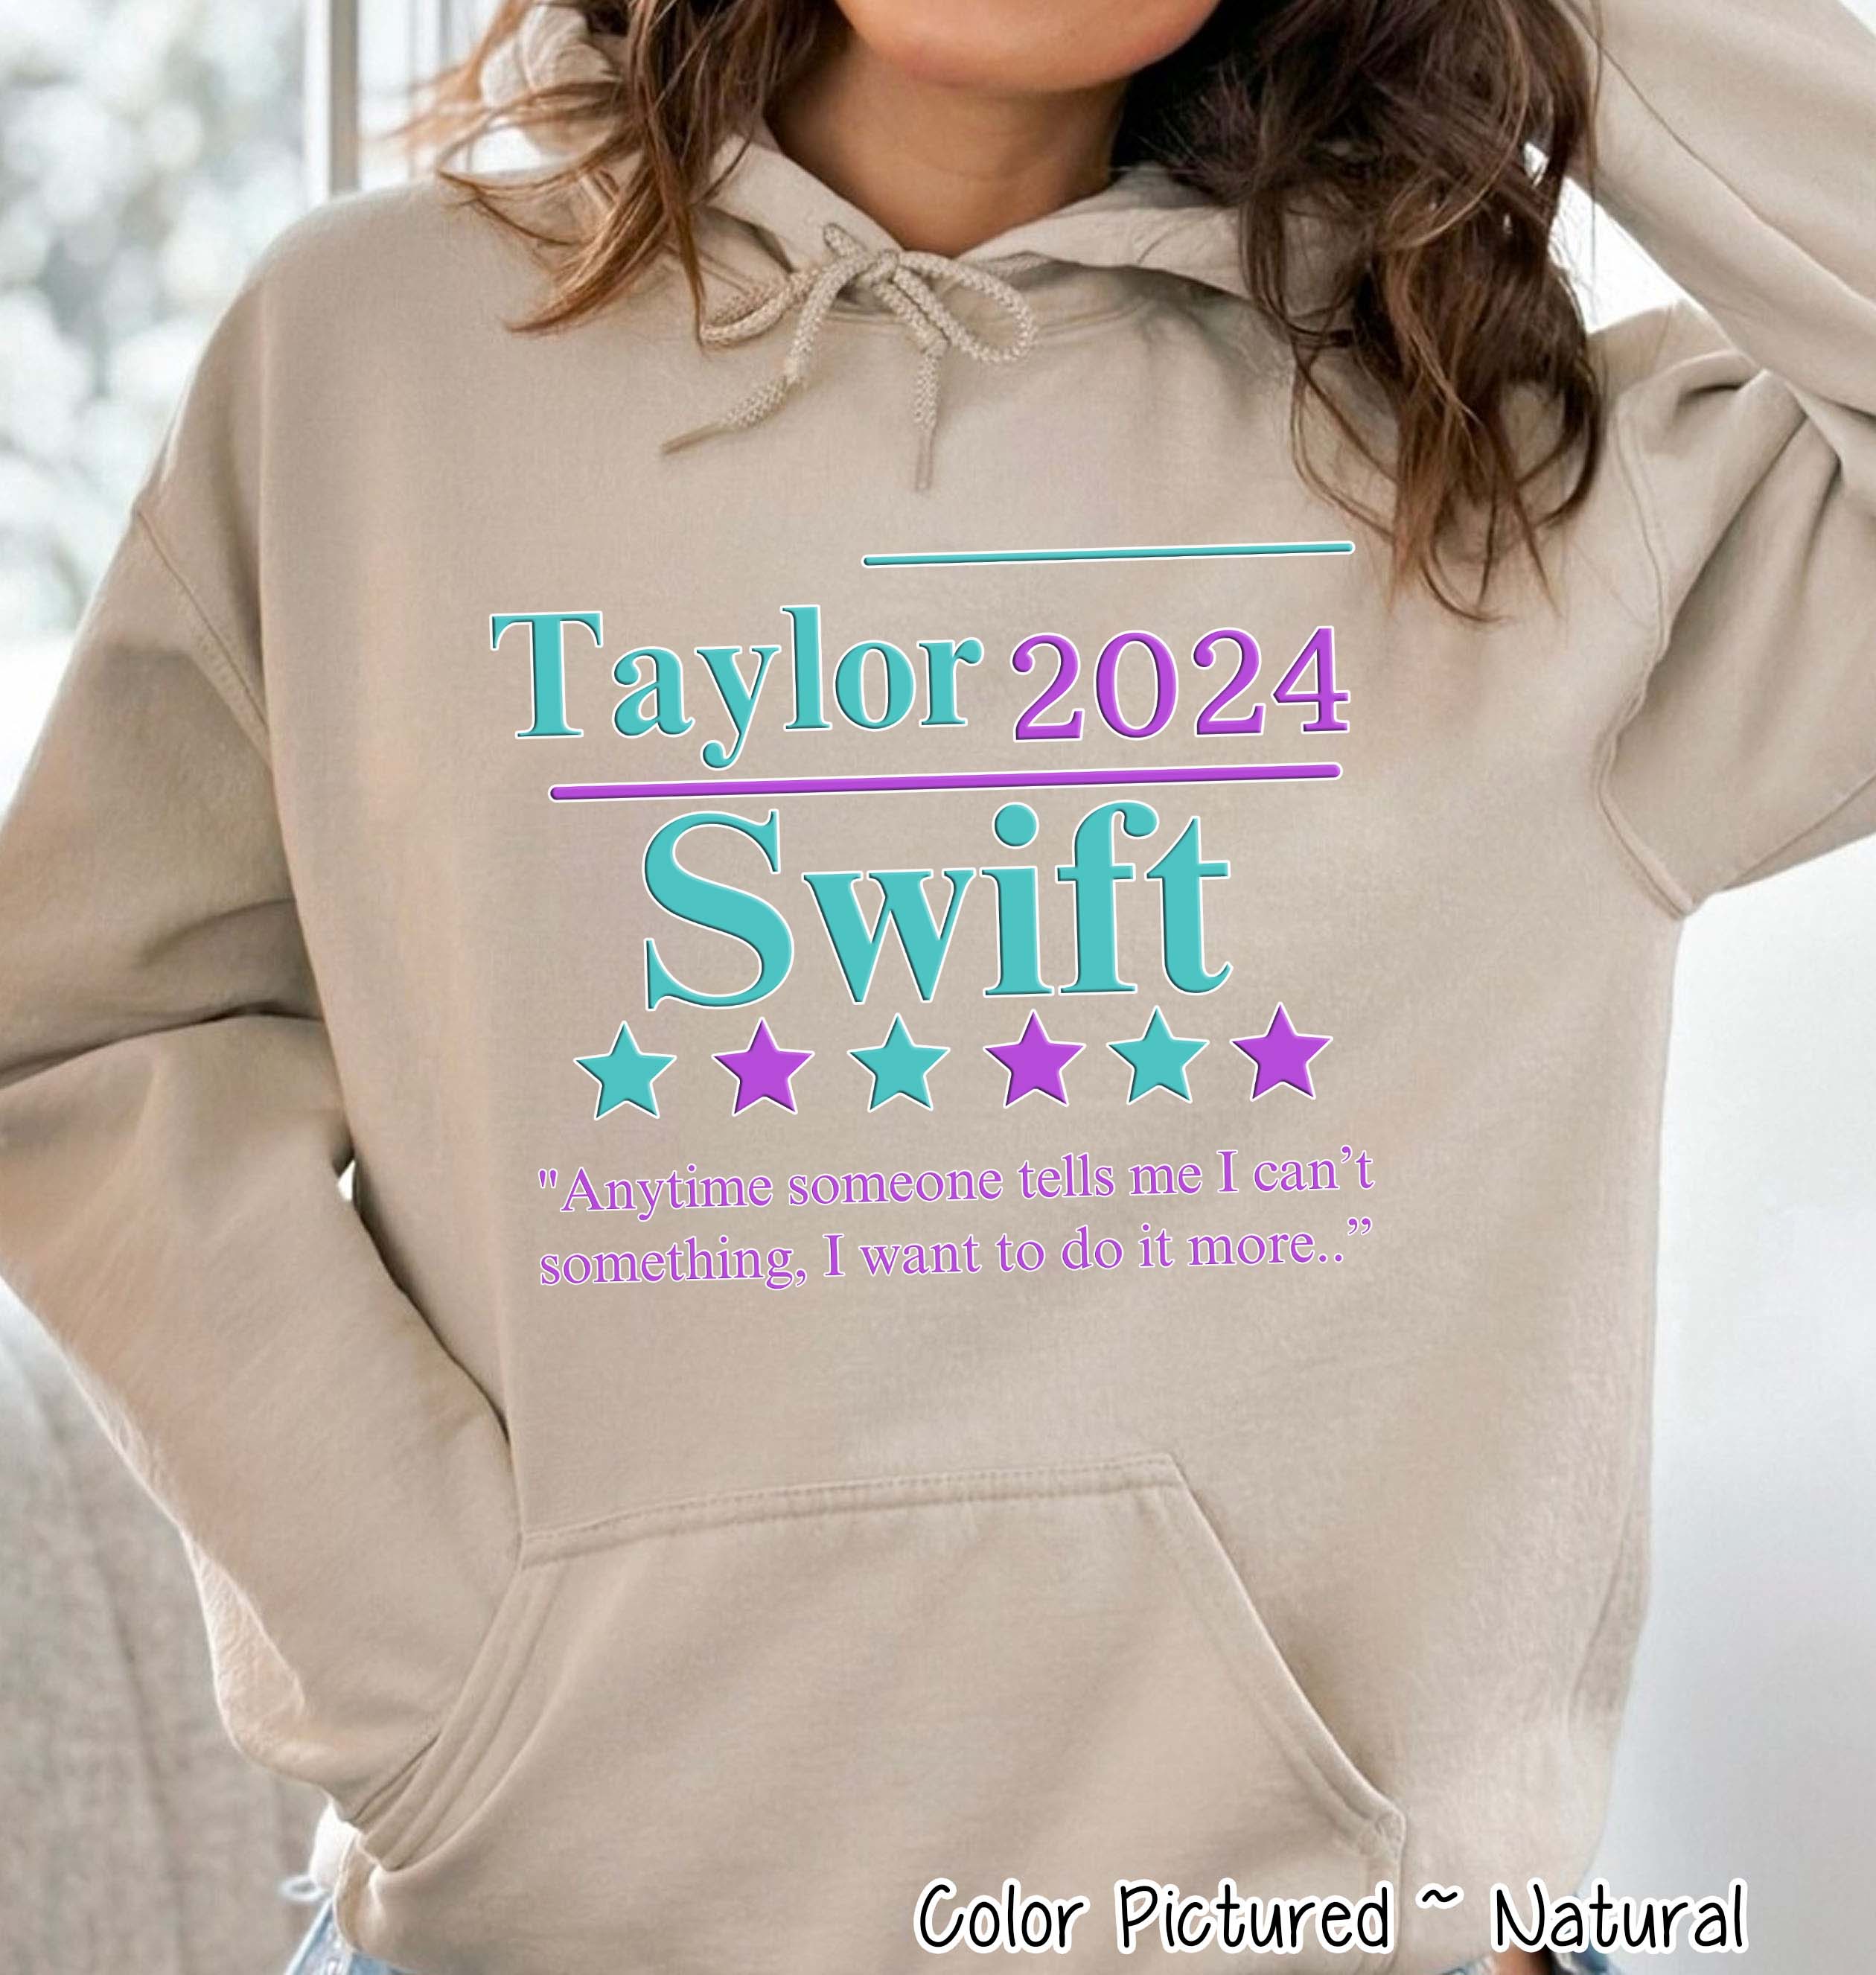 Taylor 2024 for President Funny Political Tee or Sweatshirt